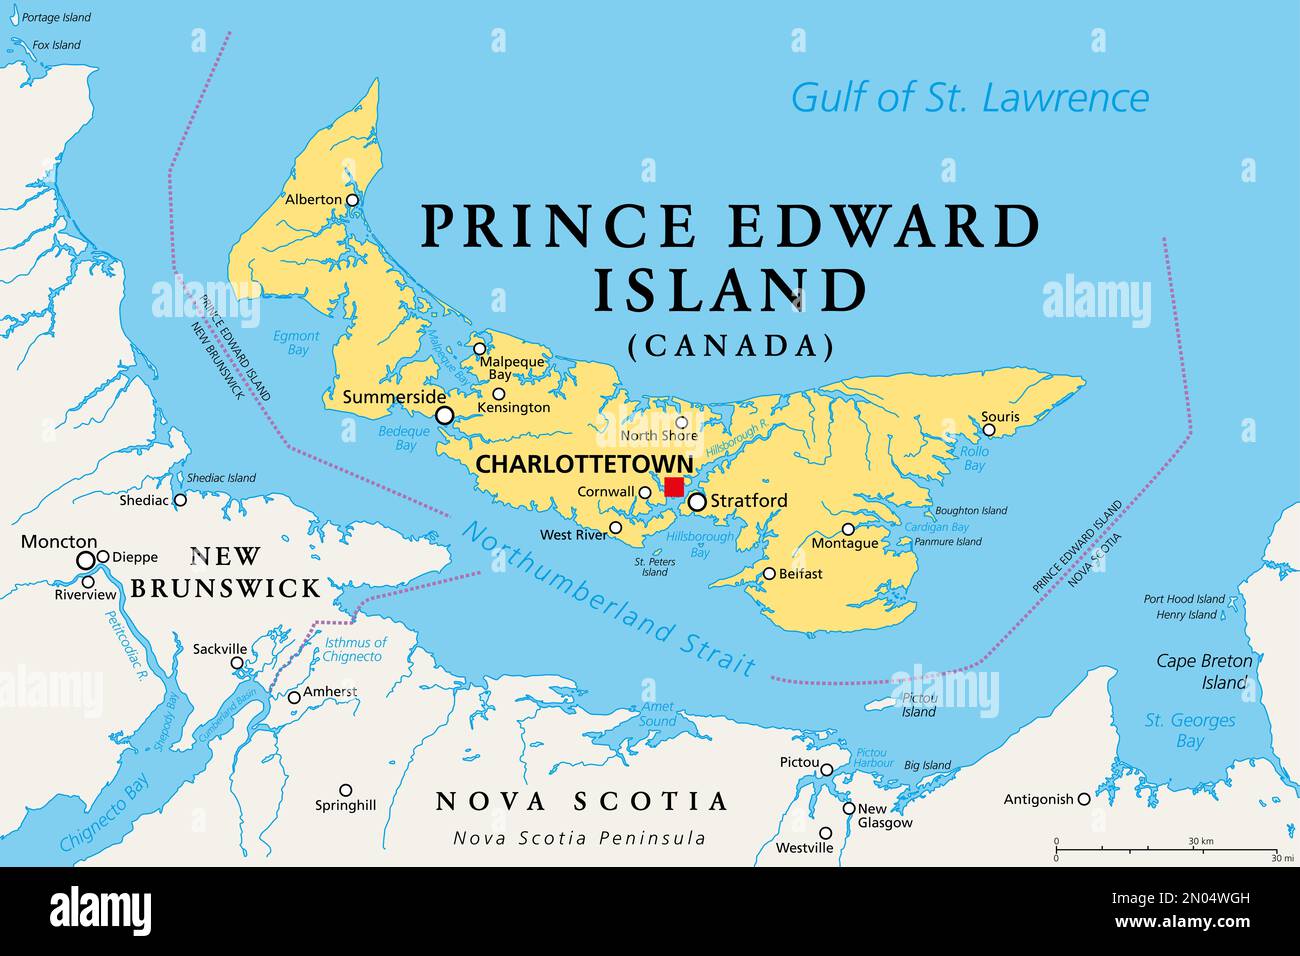 Prince Edward Island, Maritime and Atlantic province of Canada, political map. The Island, located in the Gulf of St. Lawrence. Stock Photo